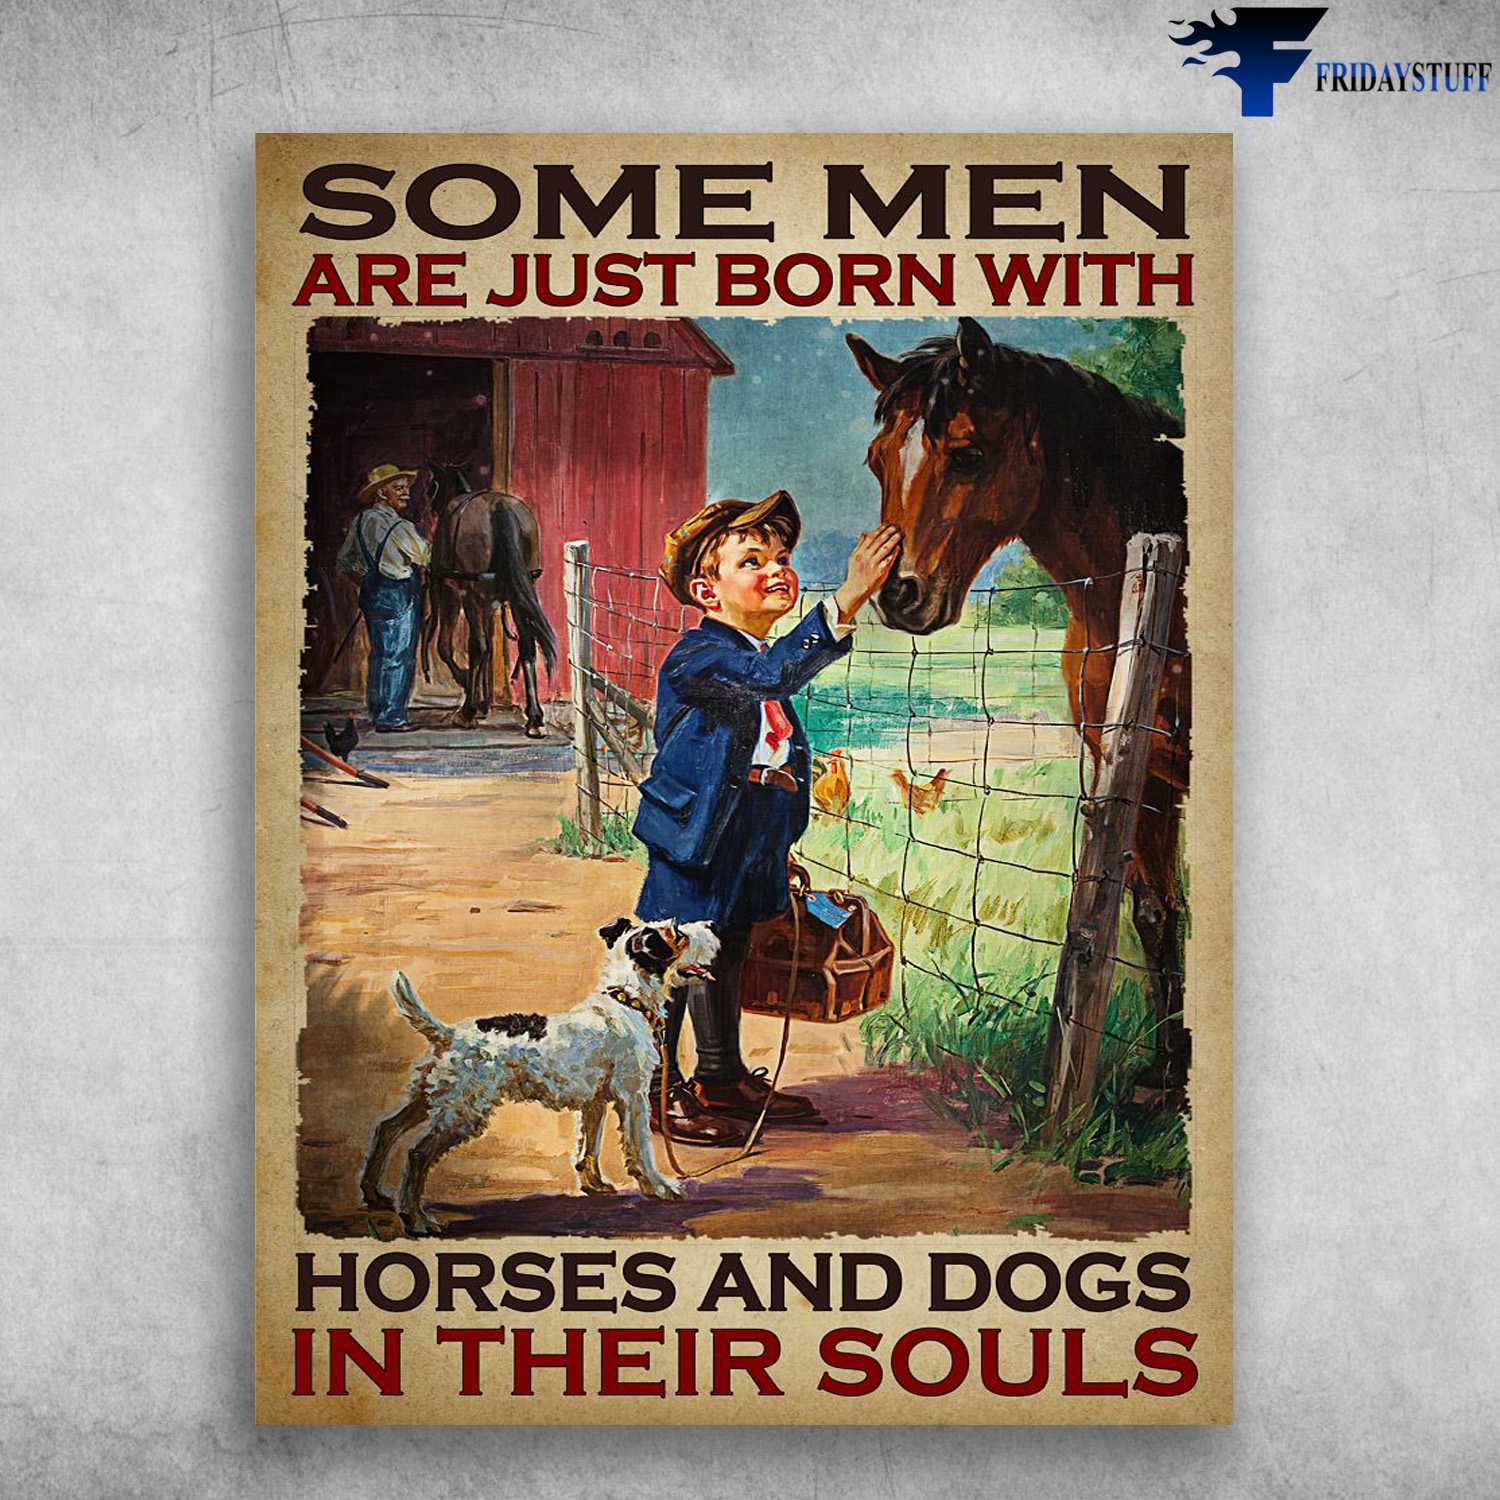 Horse And Dog, Horse Poster -Some Men Are Just Born With, Horses And Dogs, In Their Souls